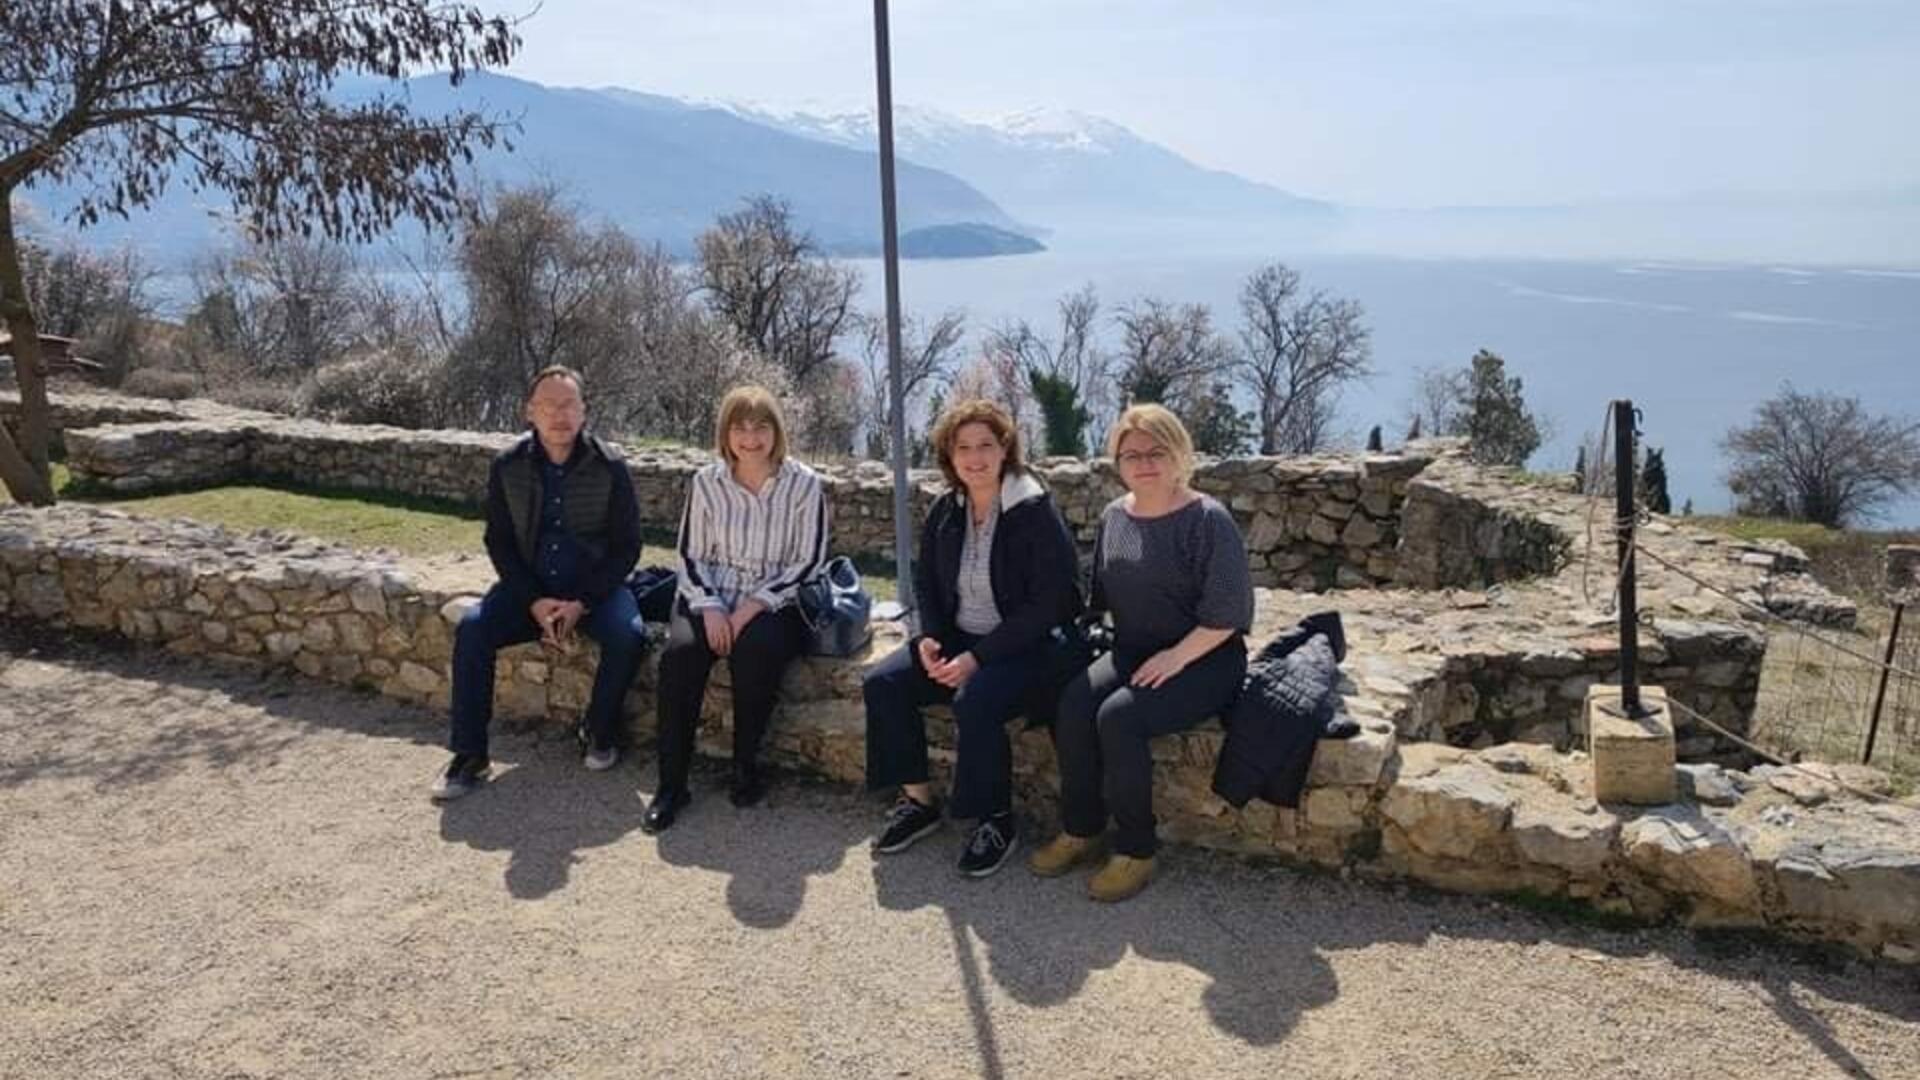 Group picture of 4 people including Gebke, sitting on the shore of lake Ohrid